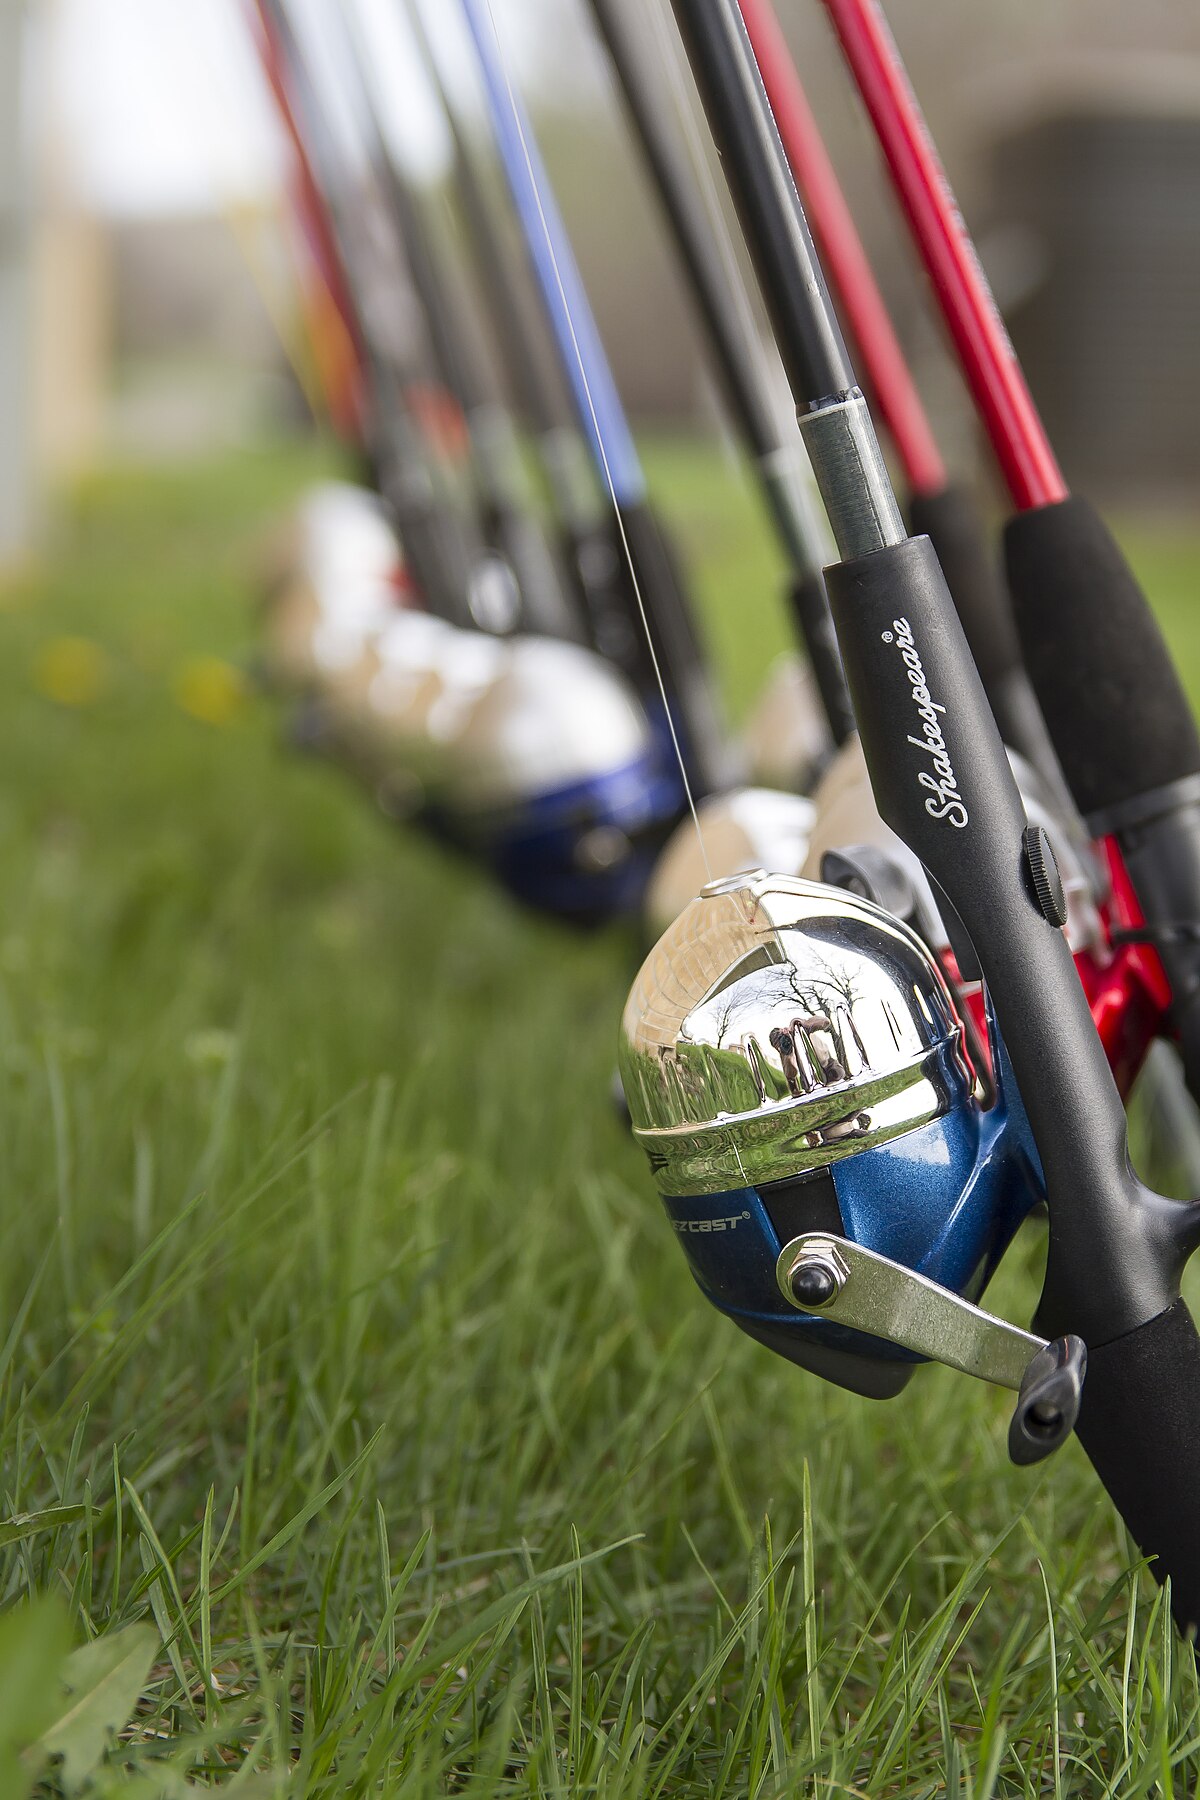 BEMIDJI, MN - 29 JUL 2019: Rack with Many Fishing Rods in Retail Store  Editorial Stock Photo - Image of fish, line: 154643043